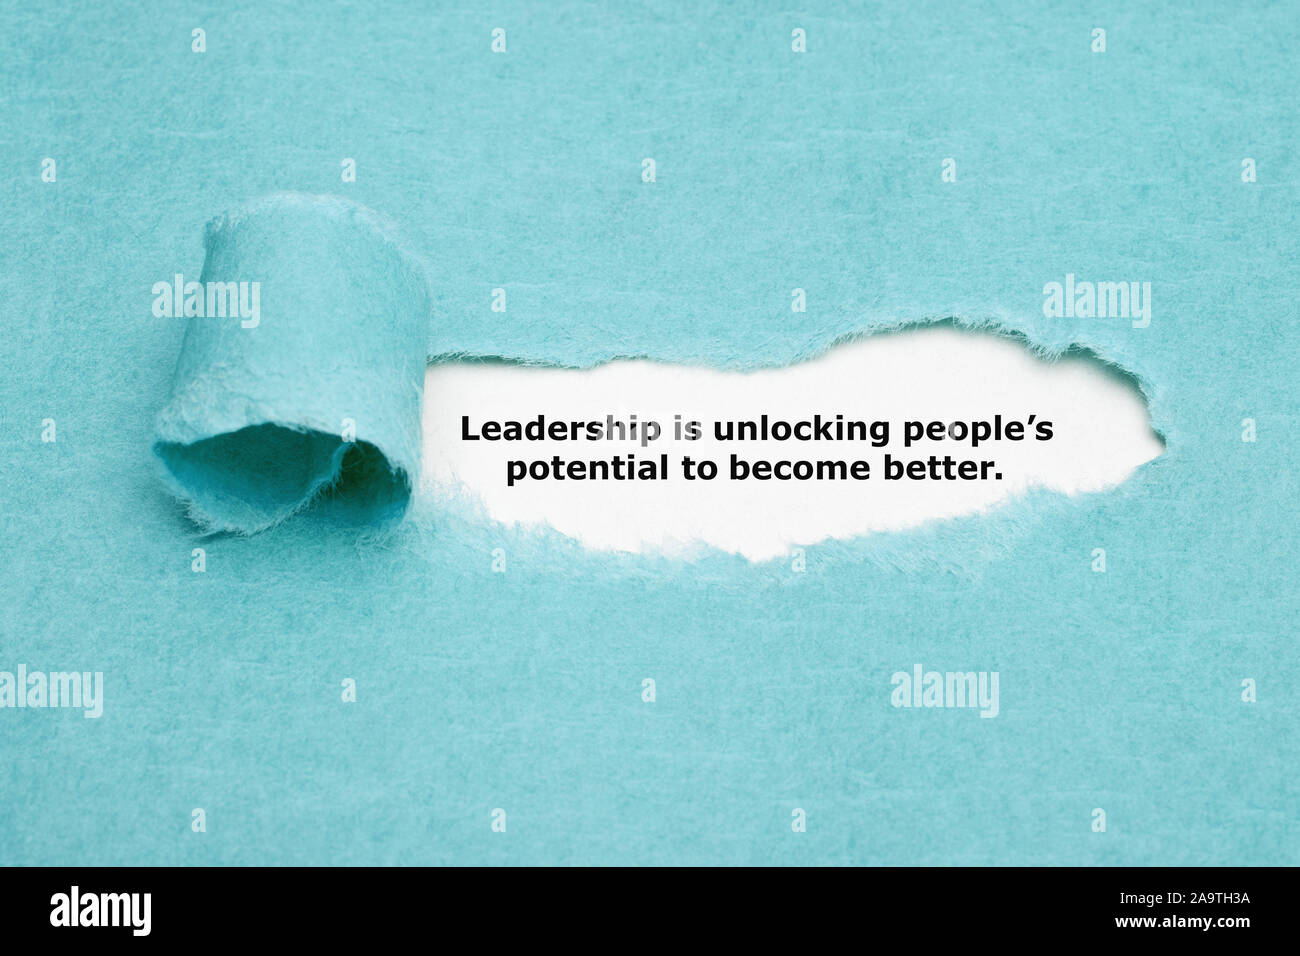 Motivational quote 'Leadership is unlocking people’s potential to become better' appearing behind torn blue paper. Stock Photo